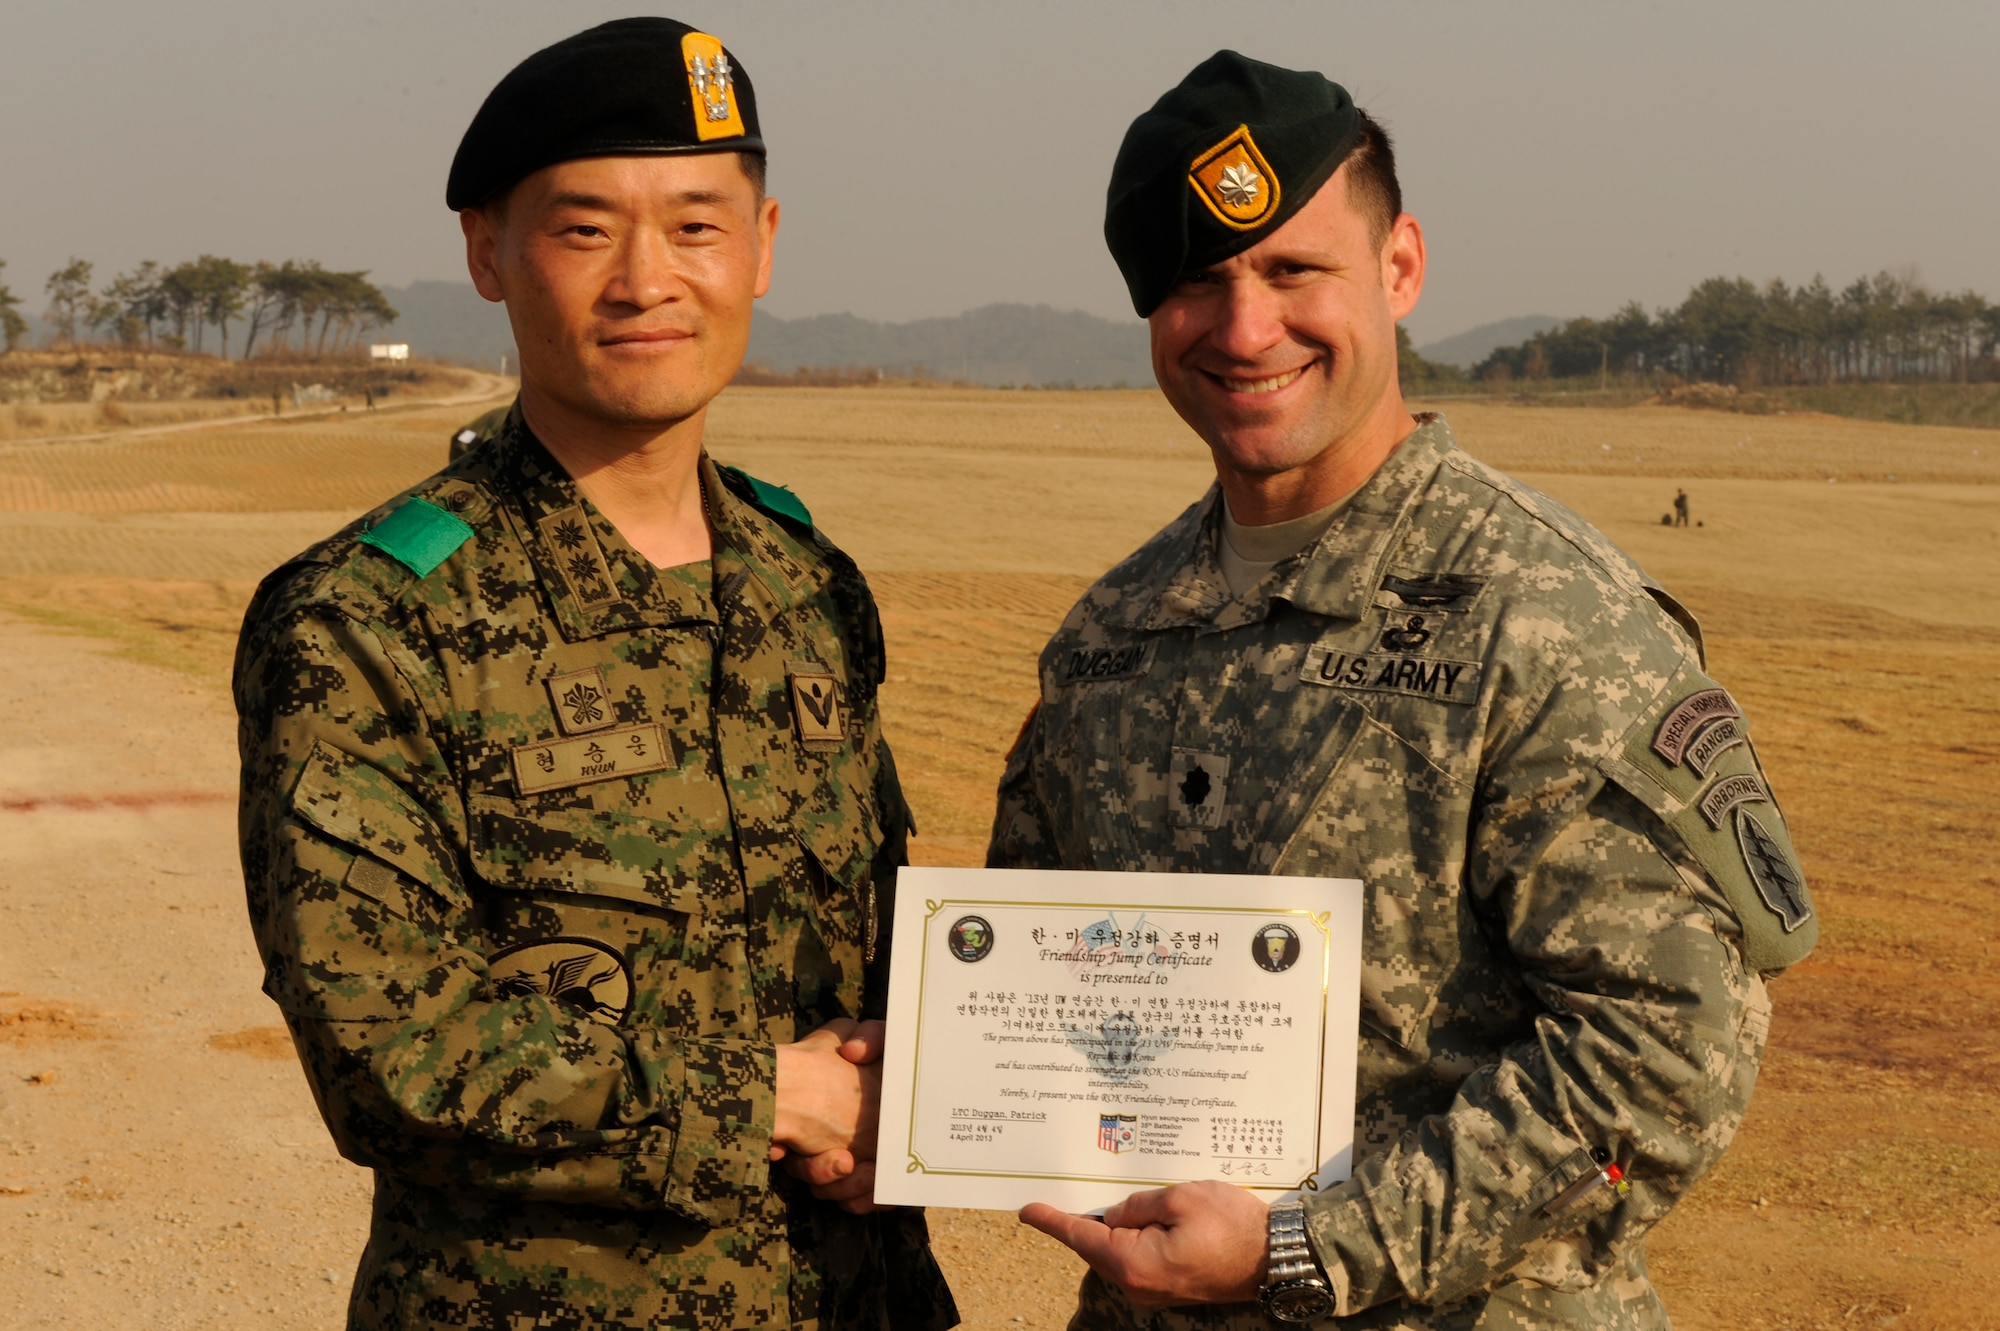 Republic of Korea army Lt. Col. Hyun,-Seung Woon, left, 7th Special Forces Brigade, 35th Special Forces Battalion commander, poses with U.S. Army Lt. Col. Patrick Douglas, 3rd Battalion, 1st special forces group commander after a joint exercise friendship jump near Iksan, Republic of Korea, April 4, 2013. The ROK and U.S. strengthened their alliance while practicing unique tactical scenarios. (U.S. Air Force photo by Senior Airman Marcus Morris/Released)